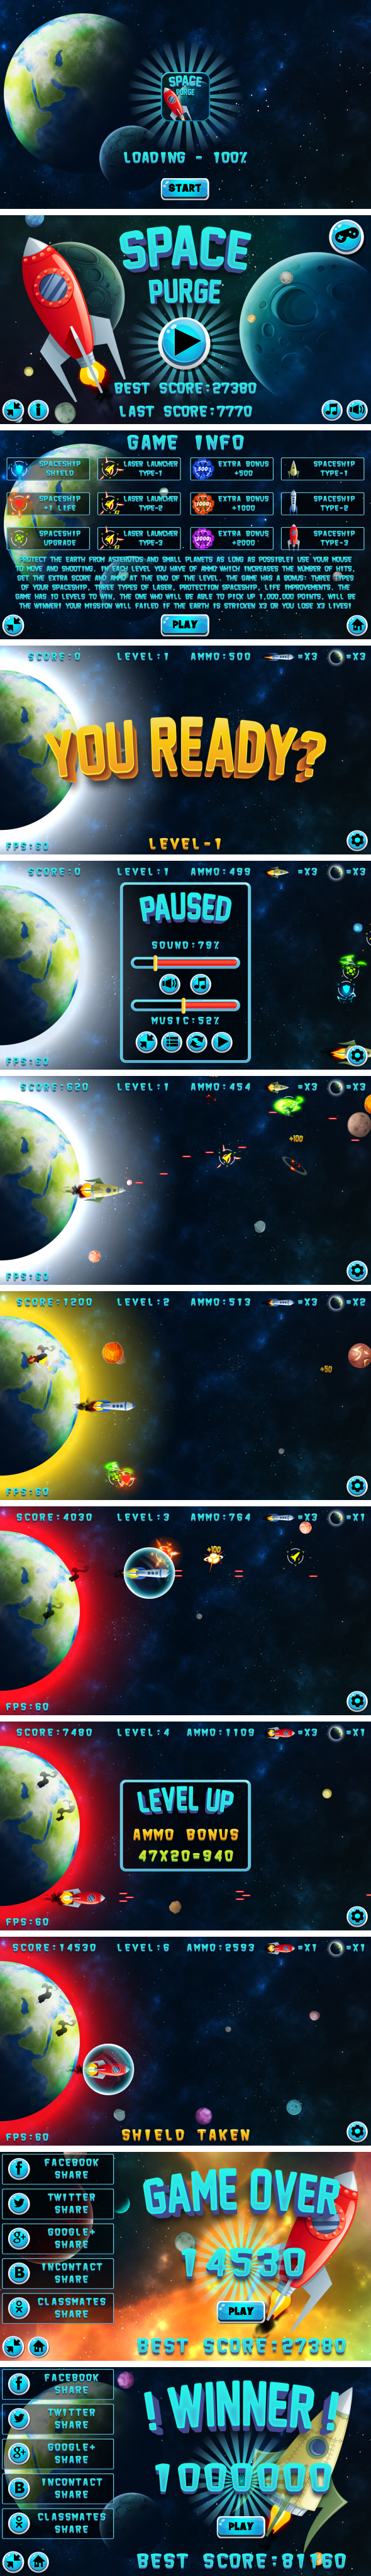 Space Purge - HTML5 Game, Mobile Version+AdMob!!! (Construct 3 | Construct 2 | Capx) - 1